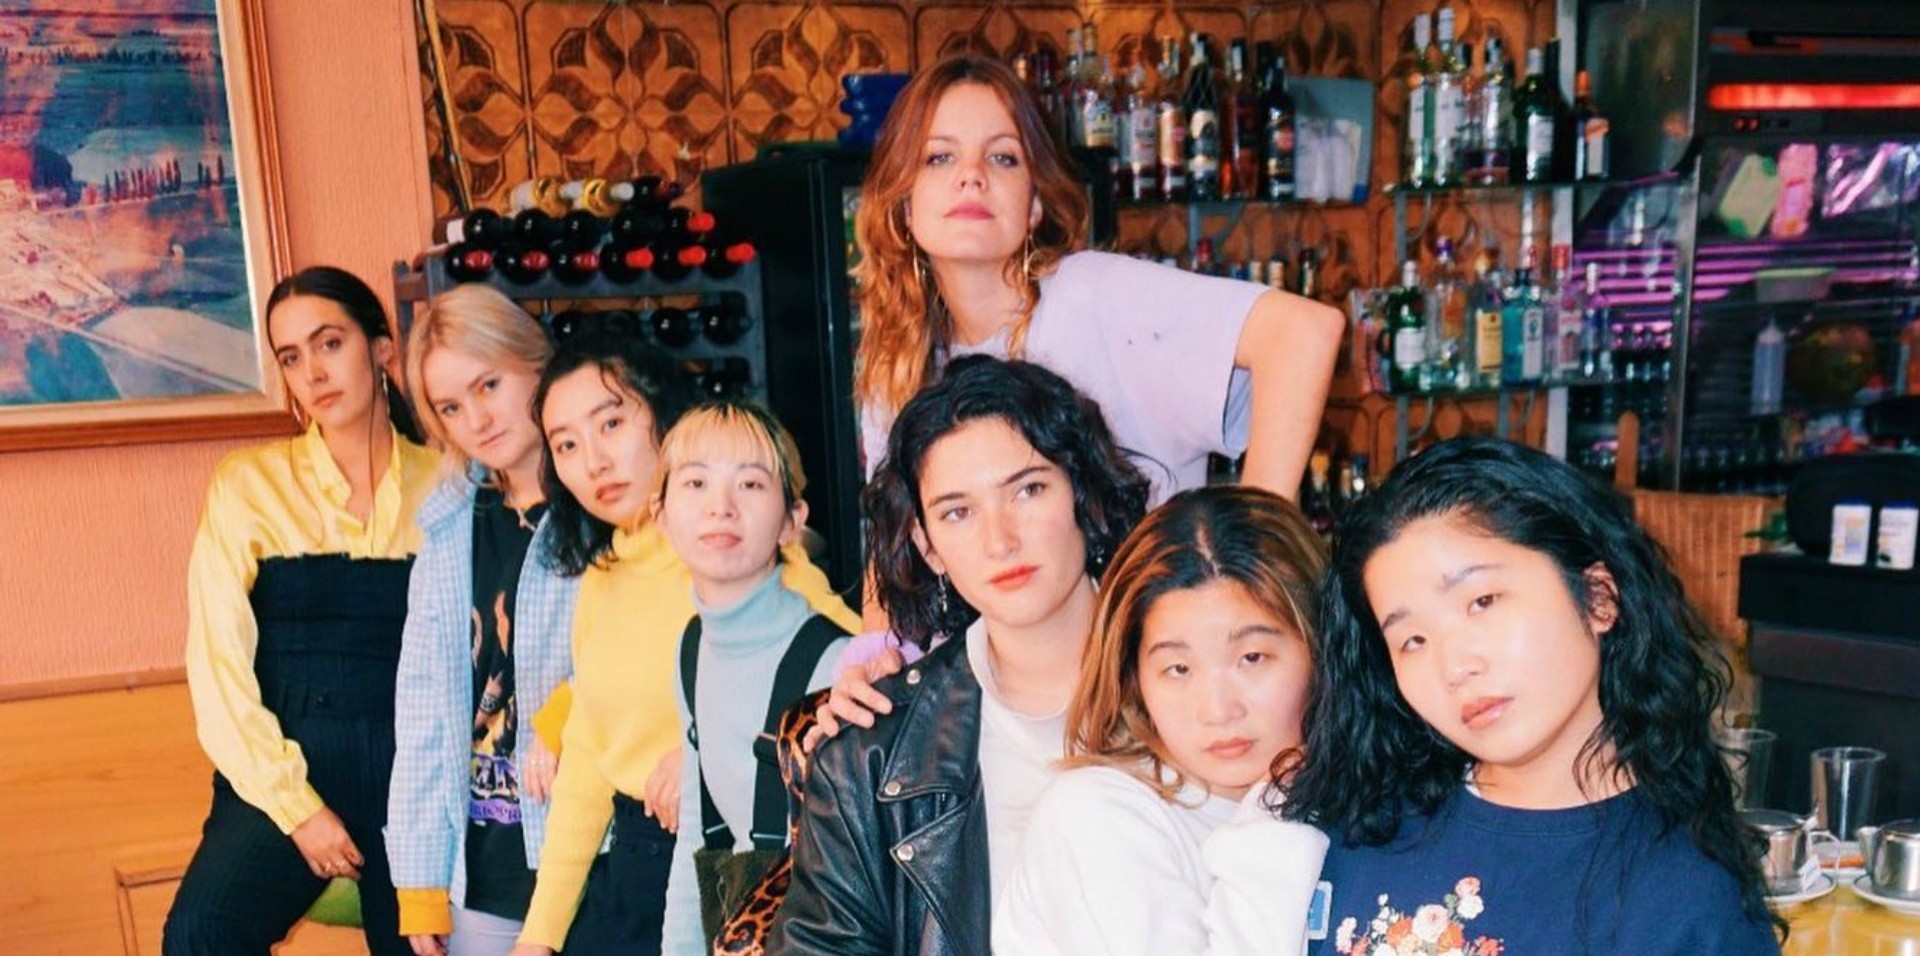 Join the ‘United Girls Rock ‘n’ Roll Club’ with CHAI and Hinds – listen